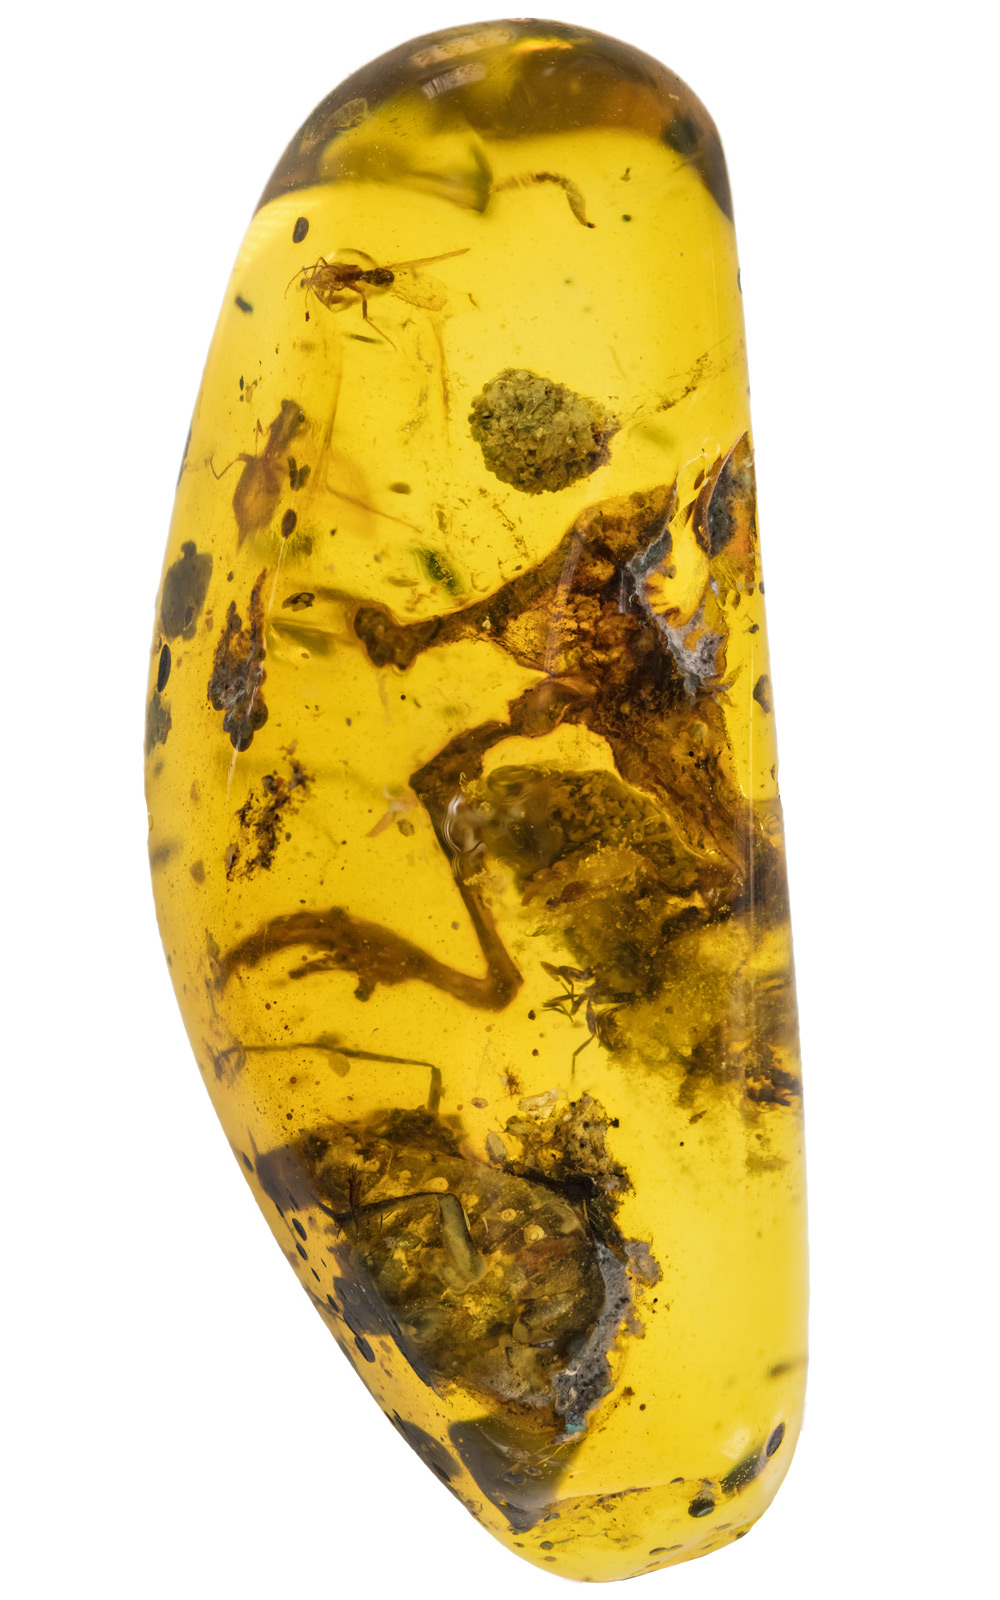 frog partly preserved in amber